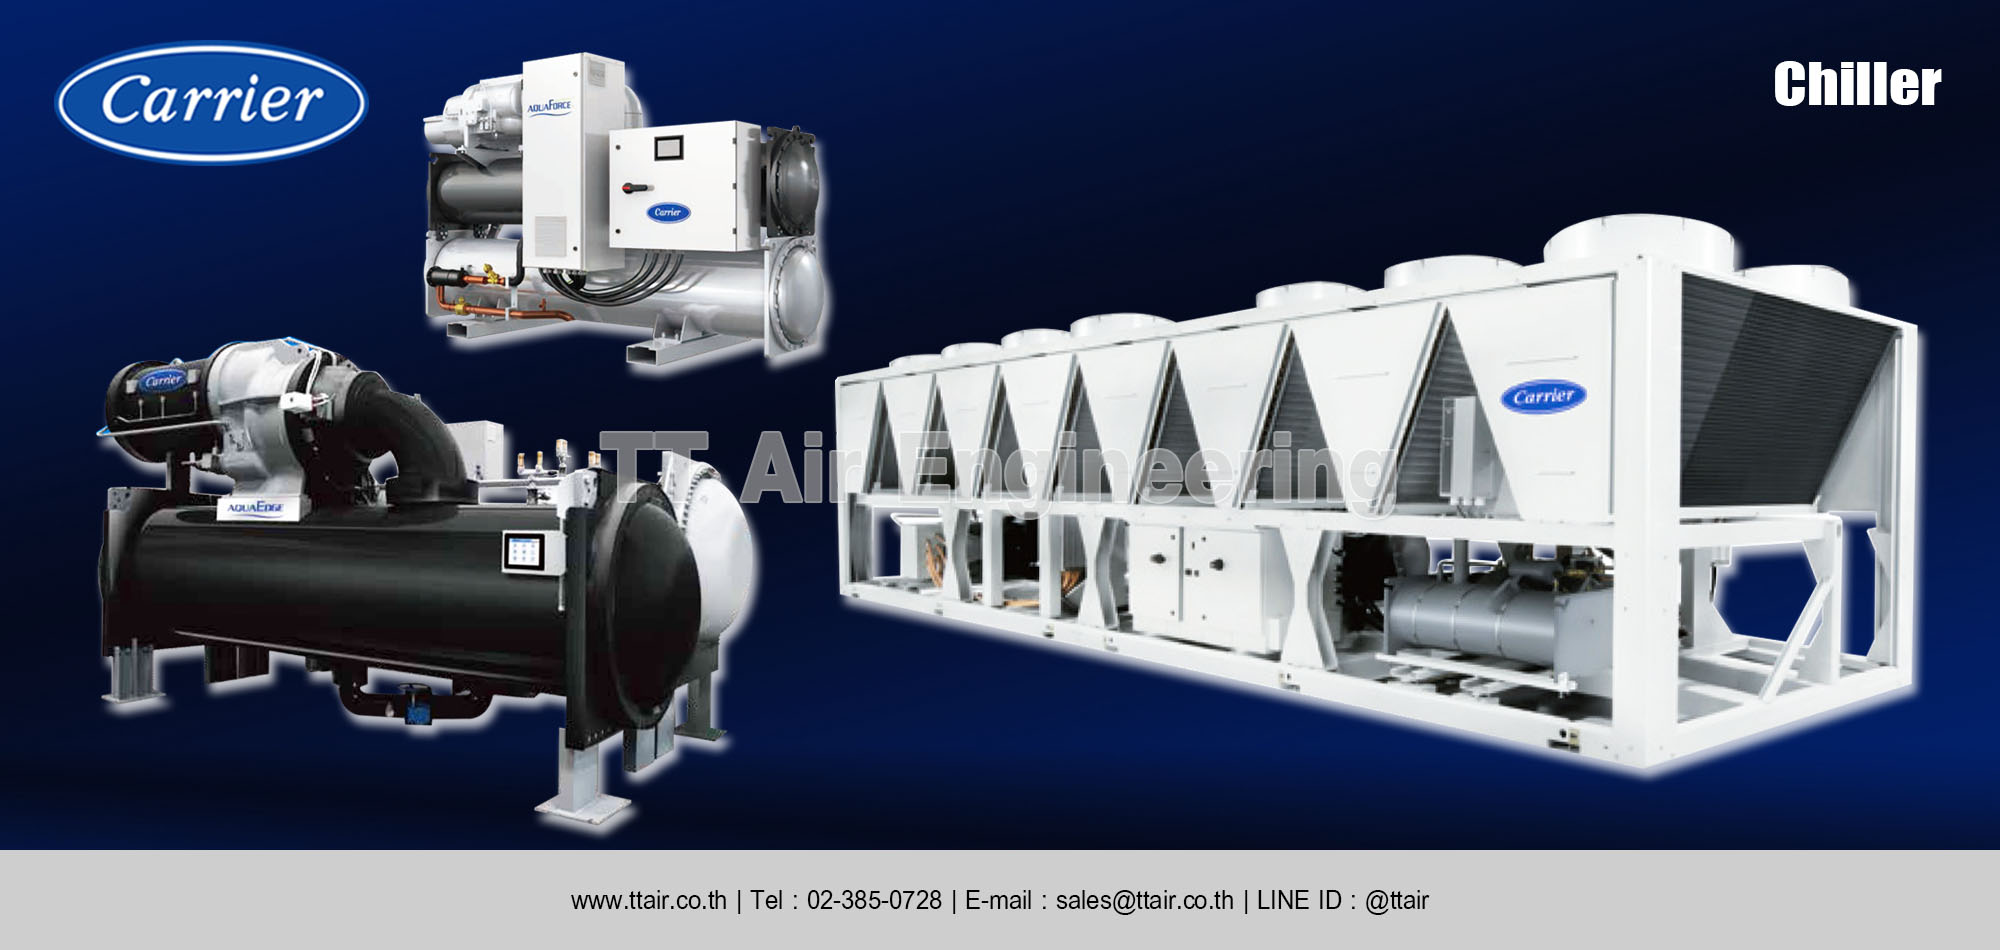 Carrier Chiller category